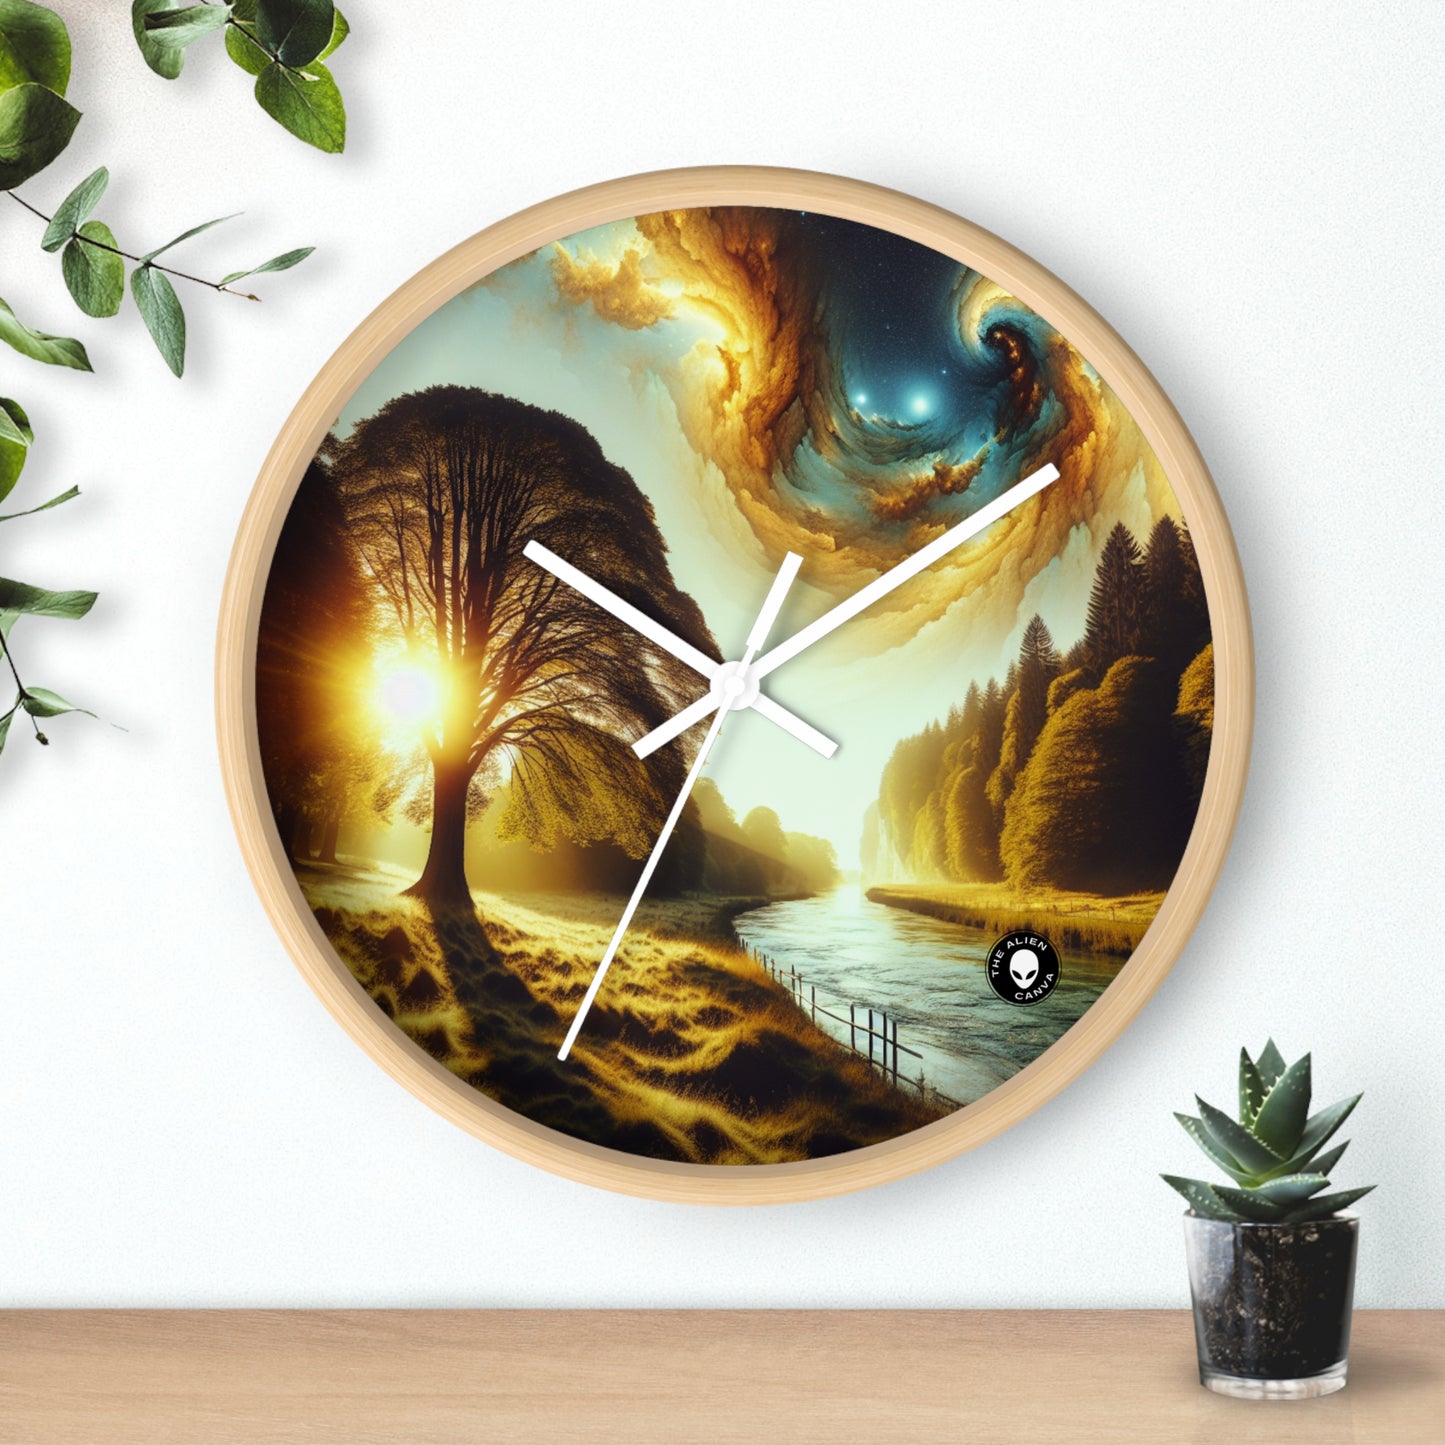 "Rebirth of the Forest: A Recycled Ecosystem" - The Alien Wall Clock Environmental Art